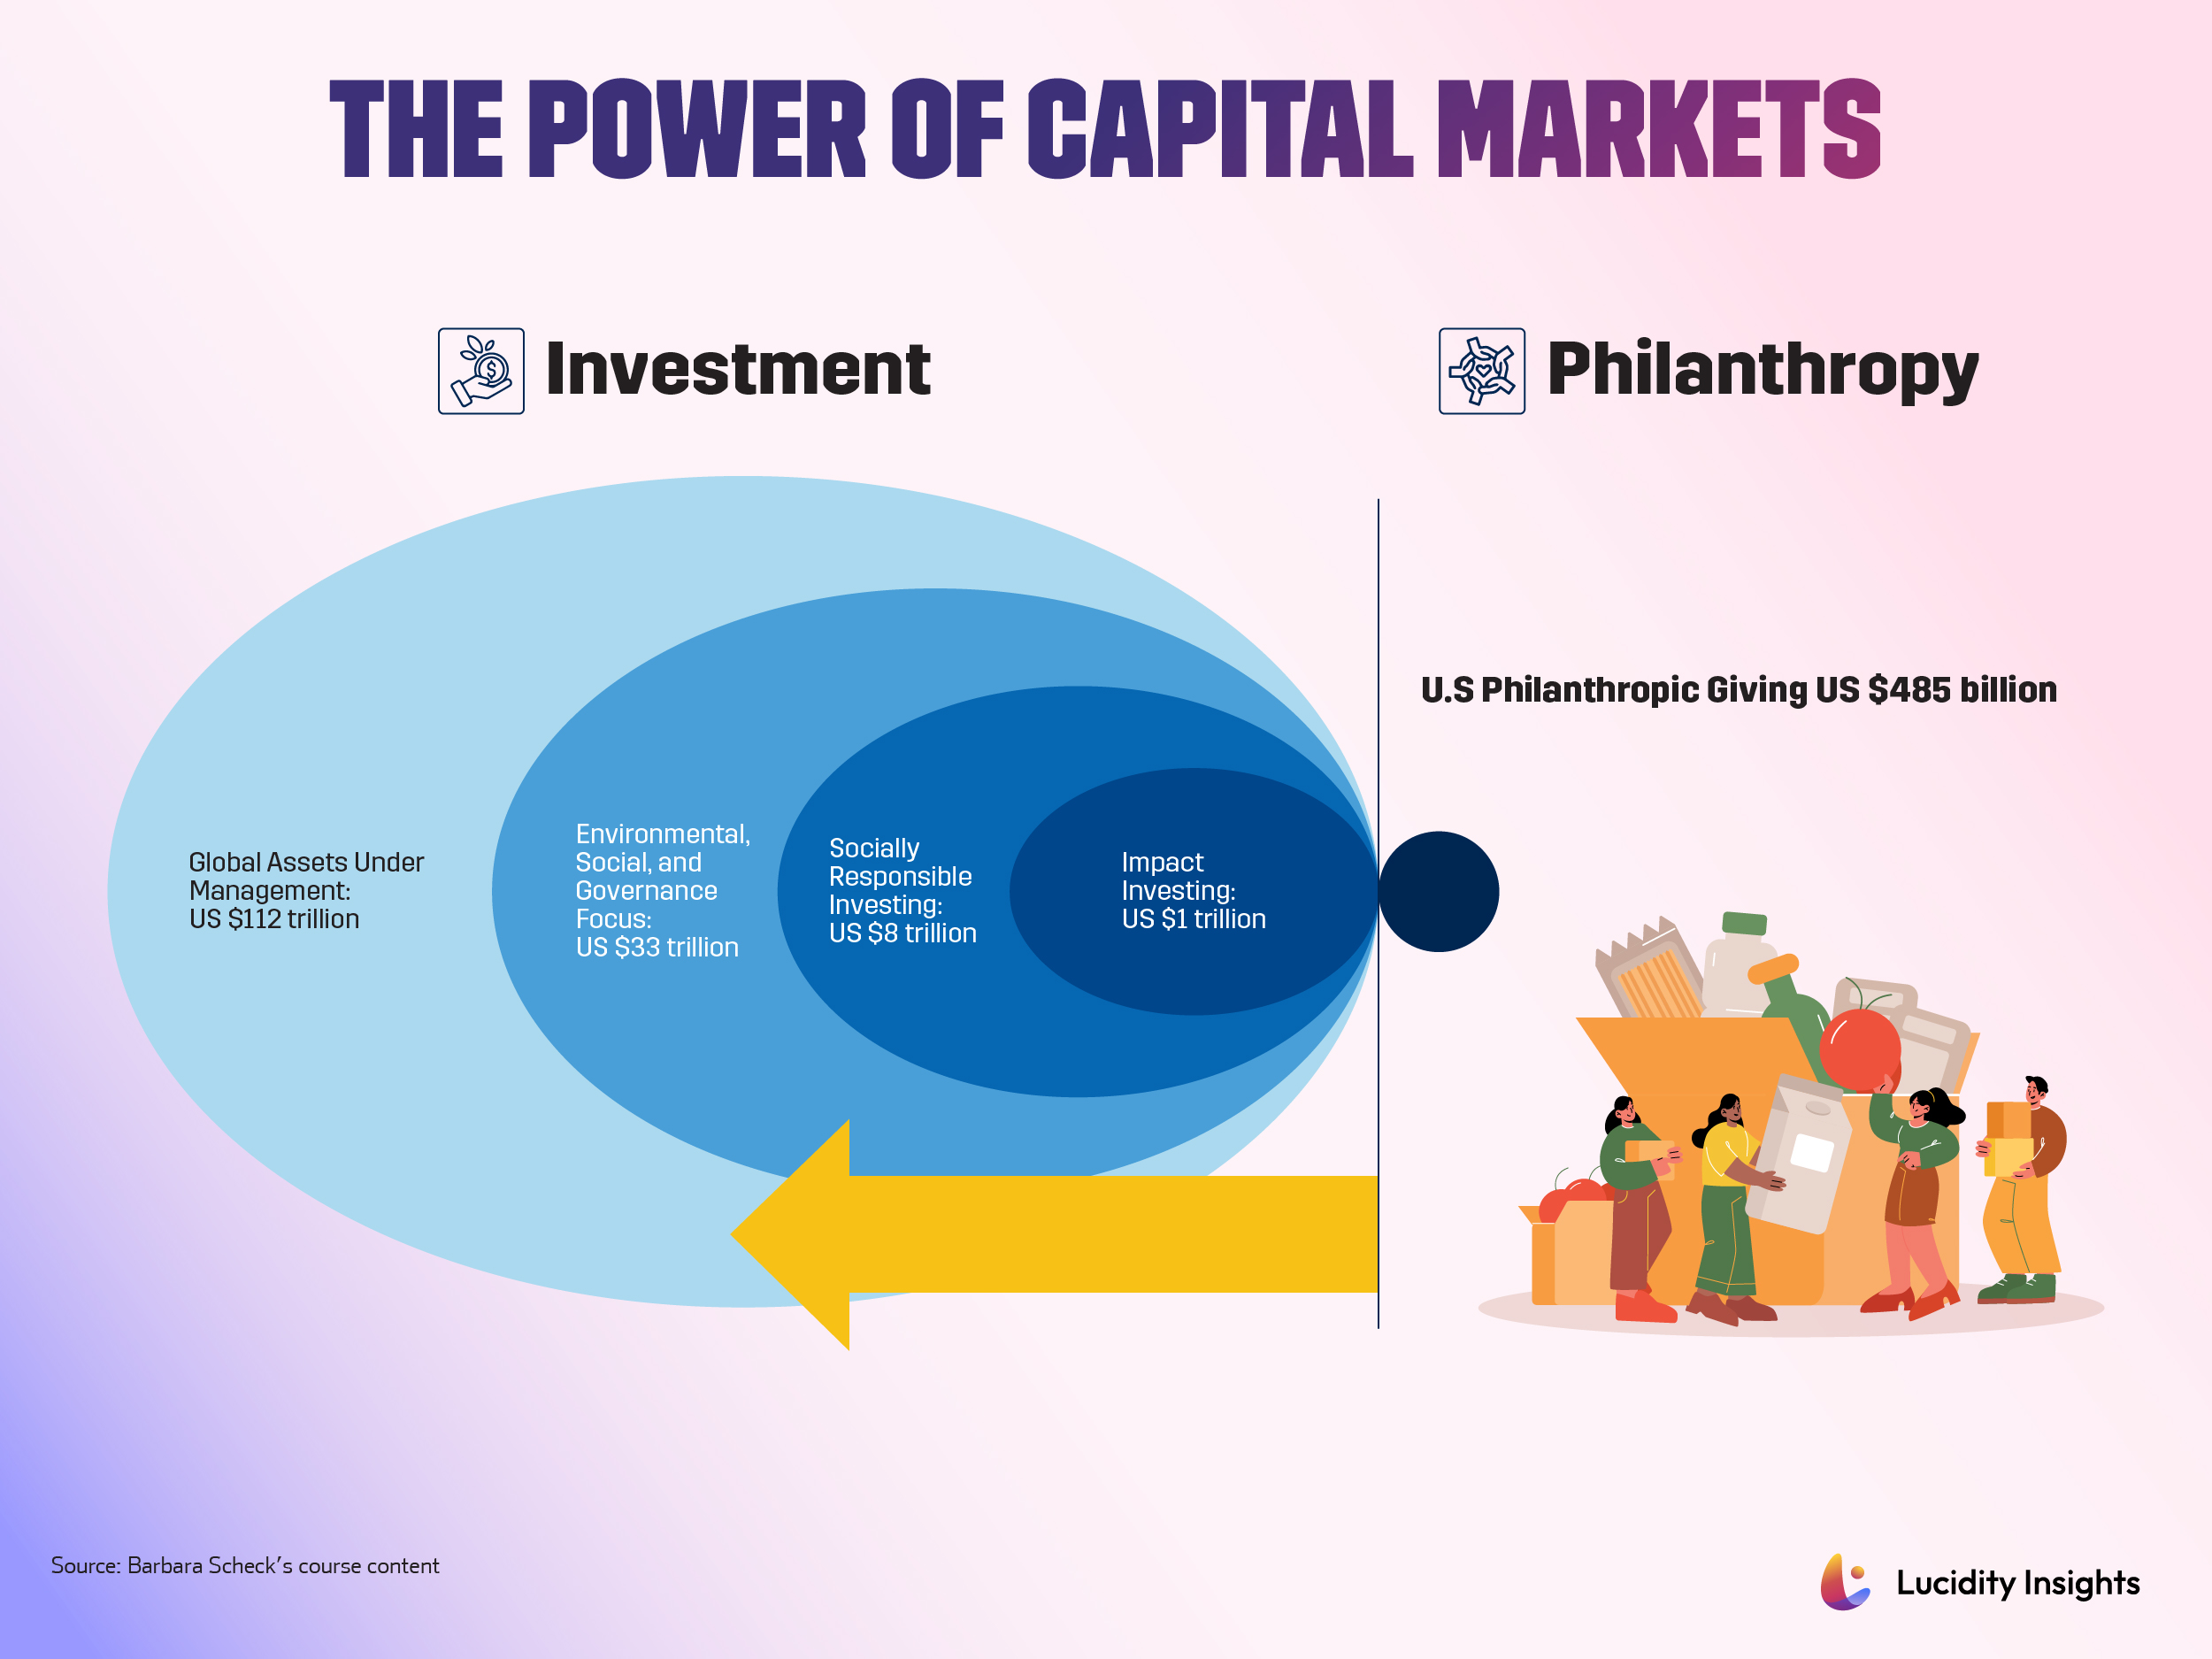 The Power of Capital Markets